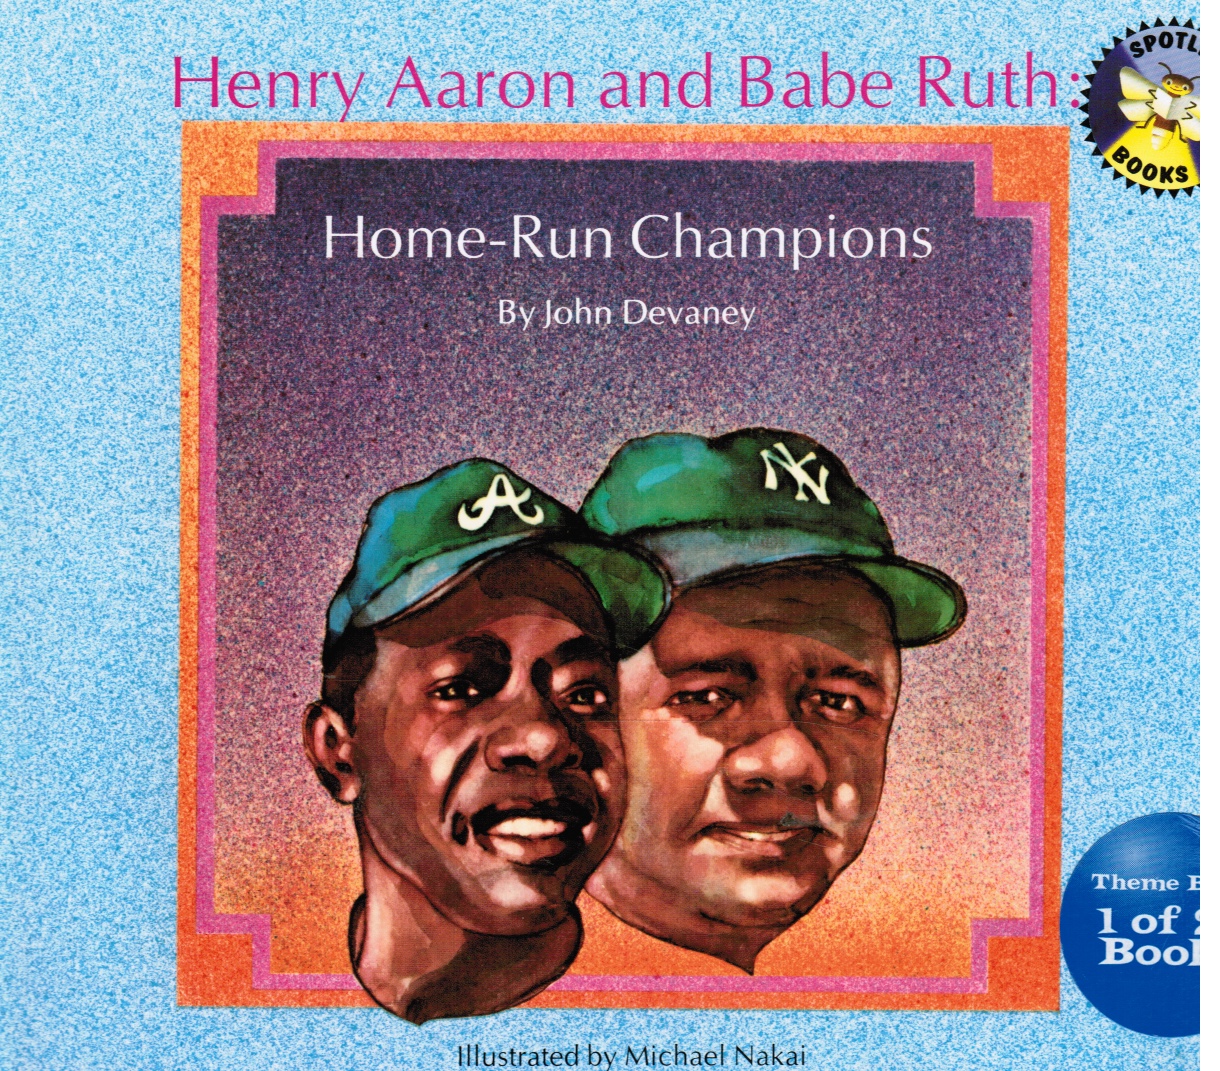 DEVANEY, JOHN - Henry Aaron and Babe Ruth - Home-Run Champions: